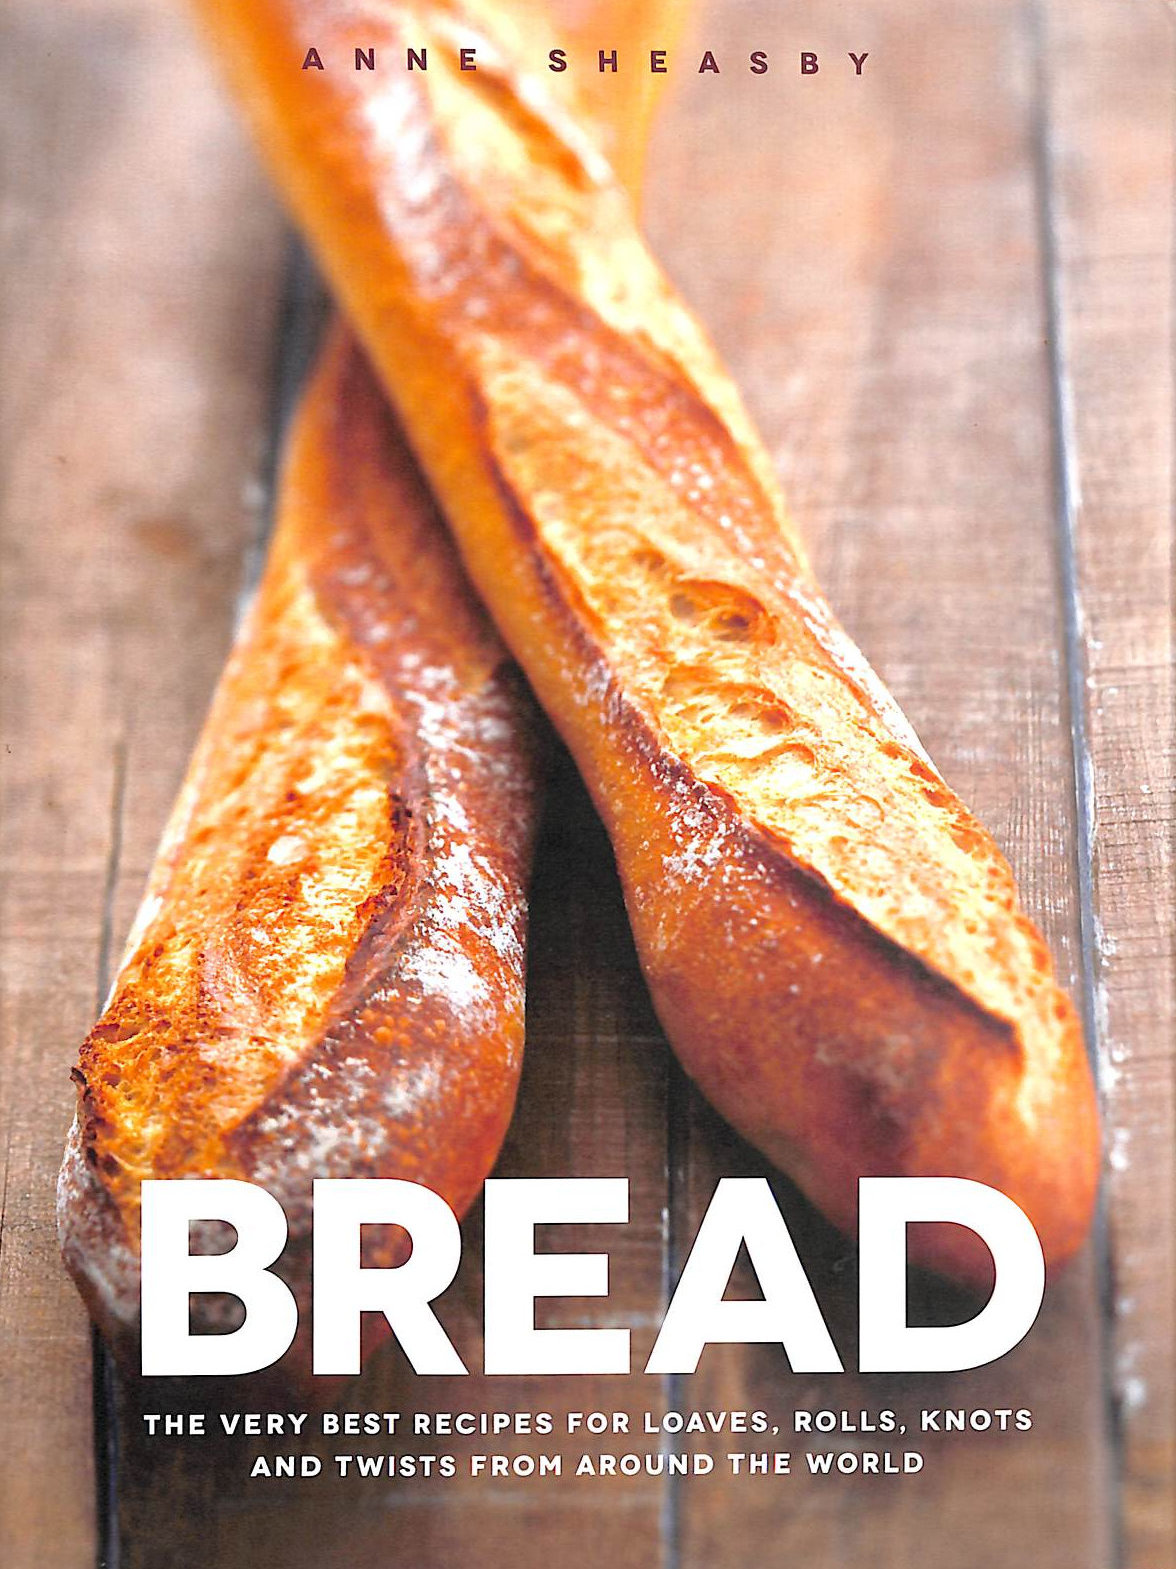 ANN SHEASBY - Bread: Recipes for Loaves, Rolls, Knots and Twists from Around the World: Over 60 breads, rolls and cakes plus delicious recipes using them